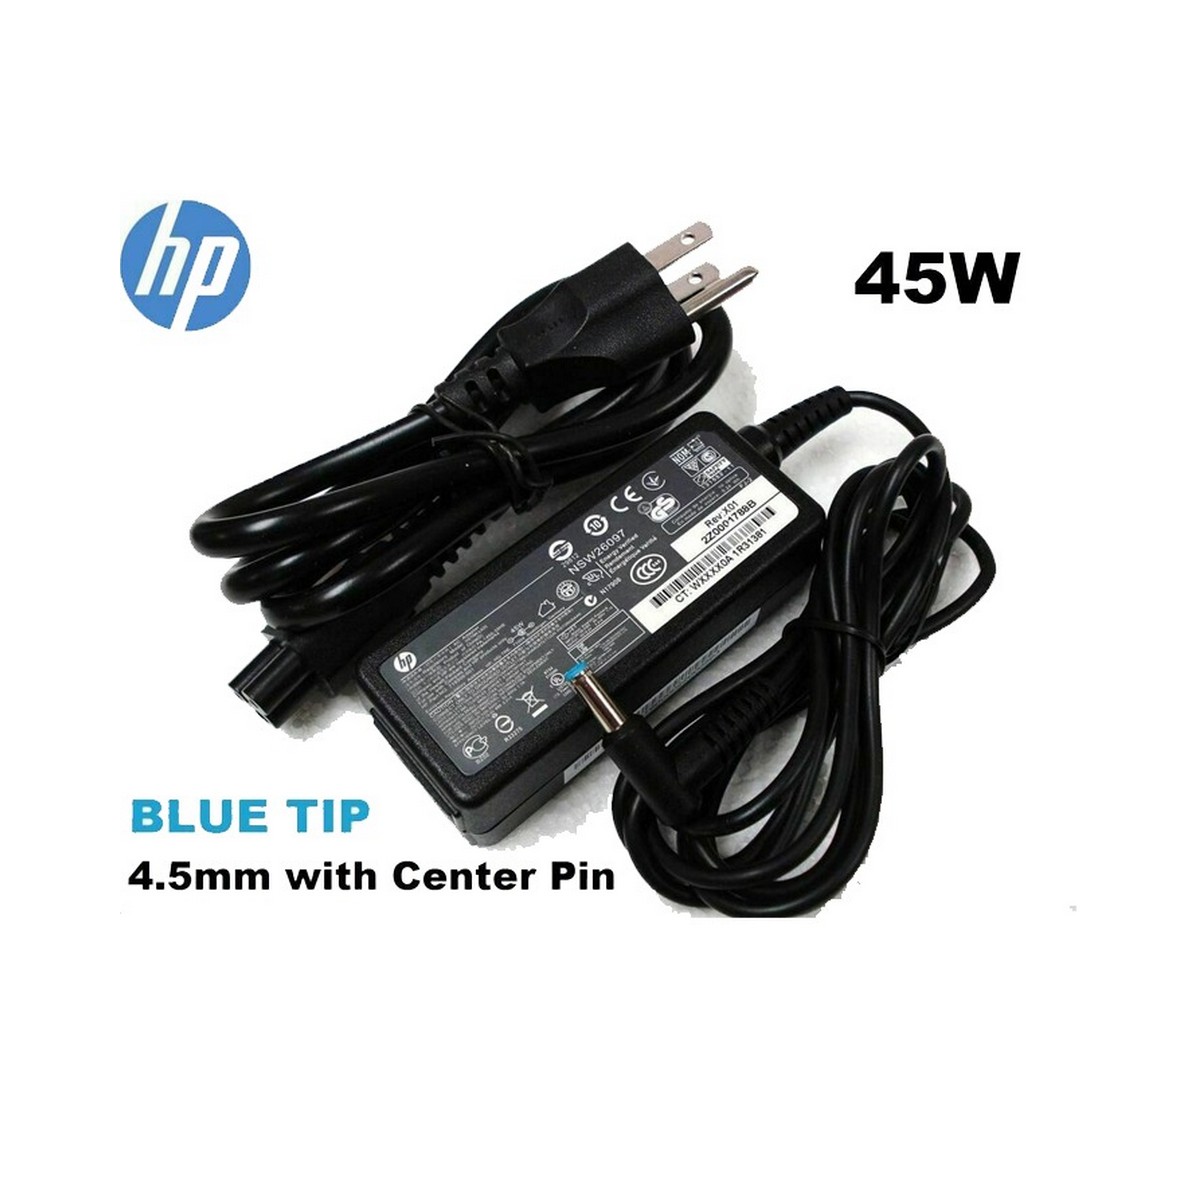 HP 19.5V 7.7A 150W Small Blue Tip Laptop Charger - Discount Electronics